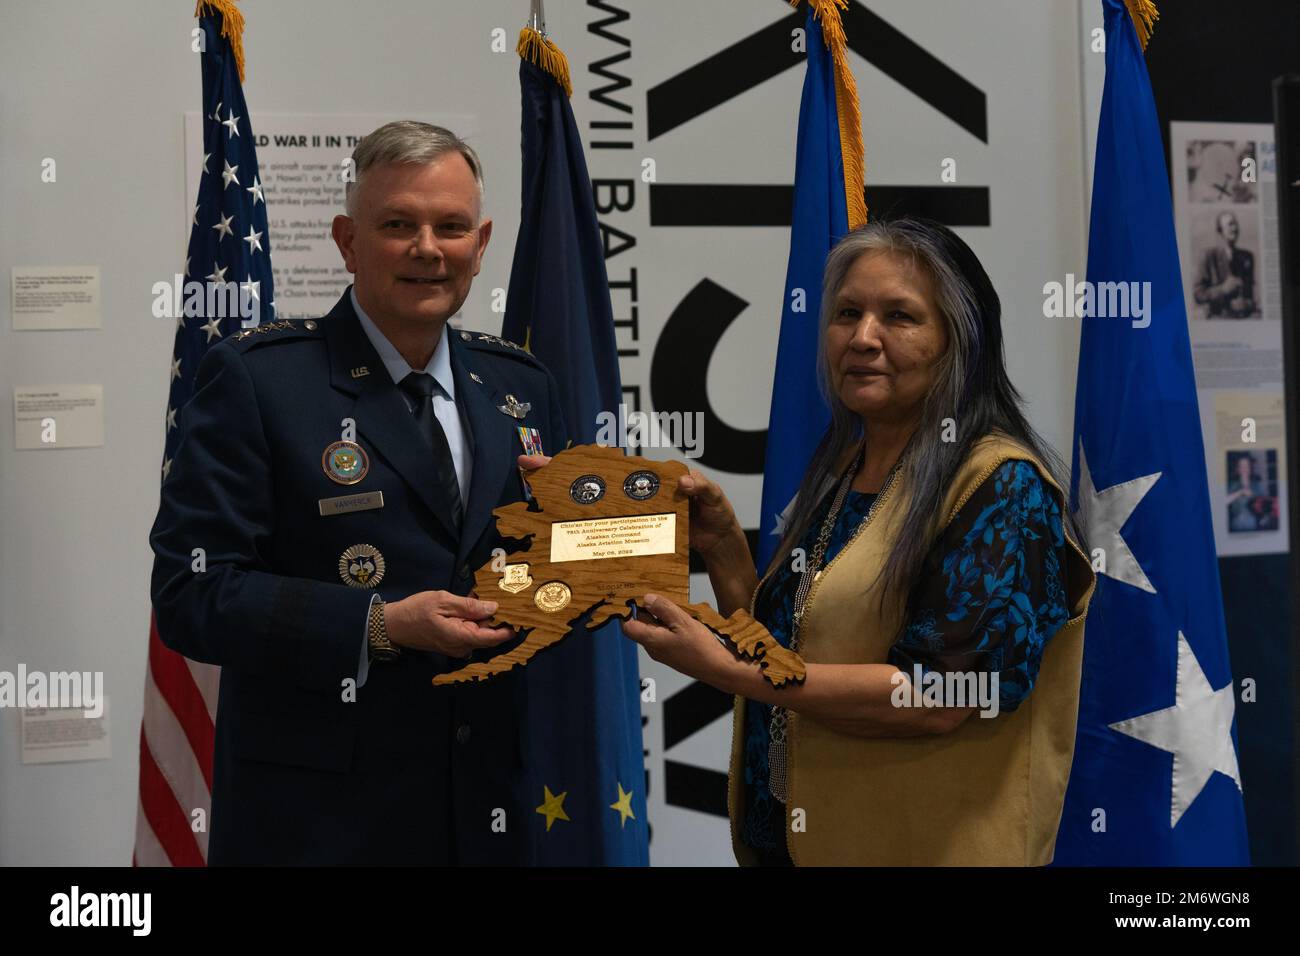 U.S. Air Force Gen. Glen VanHerck, Commander, North American Aerospace Defense Command and U.S. Northern Command, exchanges gifts with Anchorage Unangax̂ representative Maria Coleman, second chief of the Native Village of Eklutna, during Alaskan Command’s 75th anniversary at the Alaska Aviation Museum in Anchorage, Alaska, May 6, 2022. The gift exchange was in recognition of the relationship between the federally recognized tribes and the Department of Defense. Stock Photo